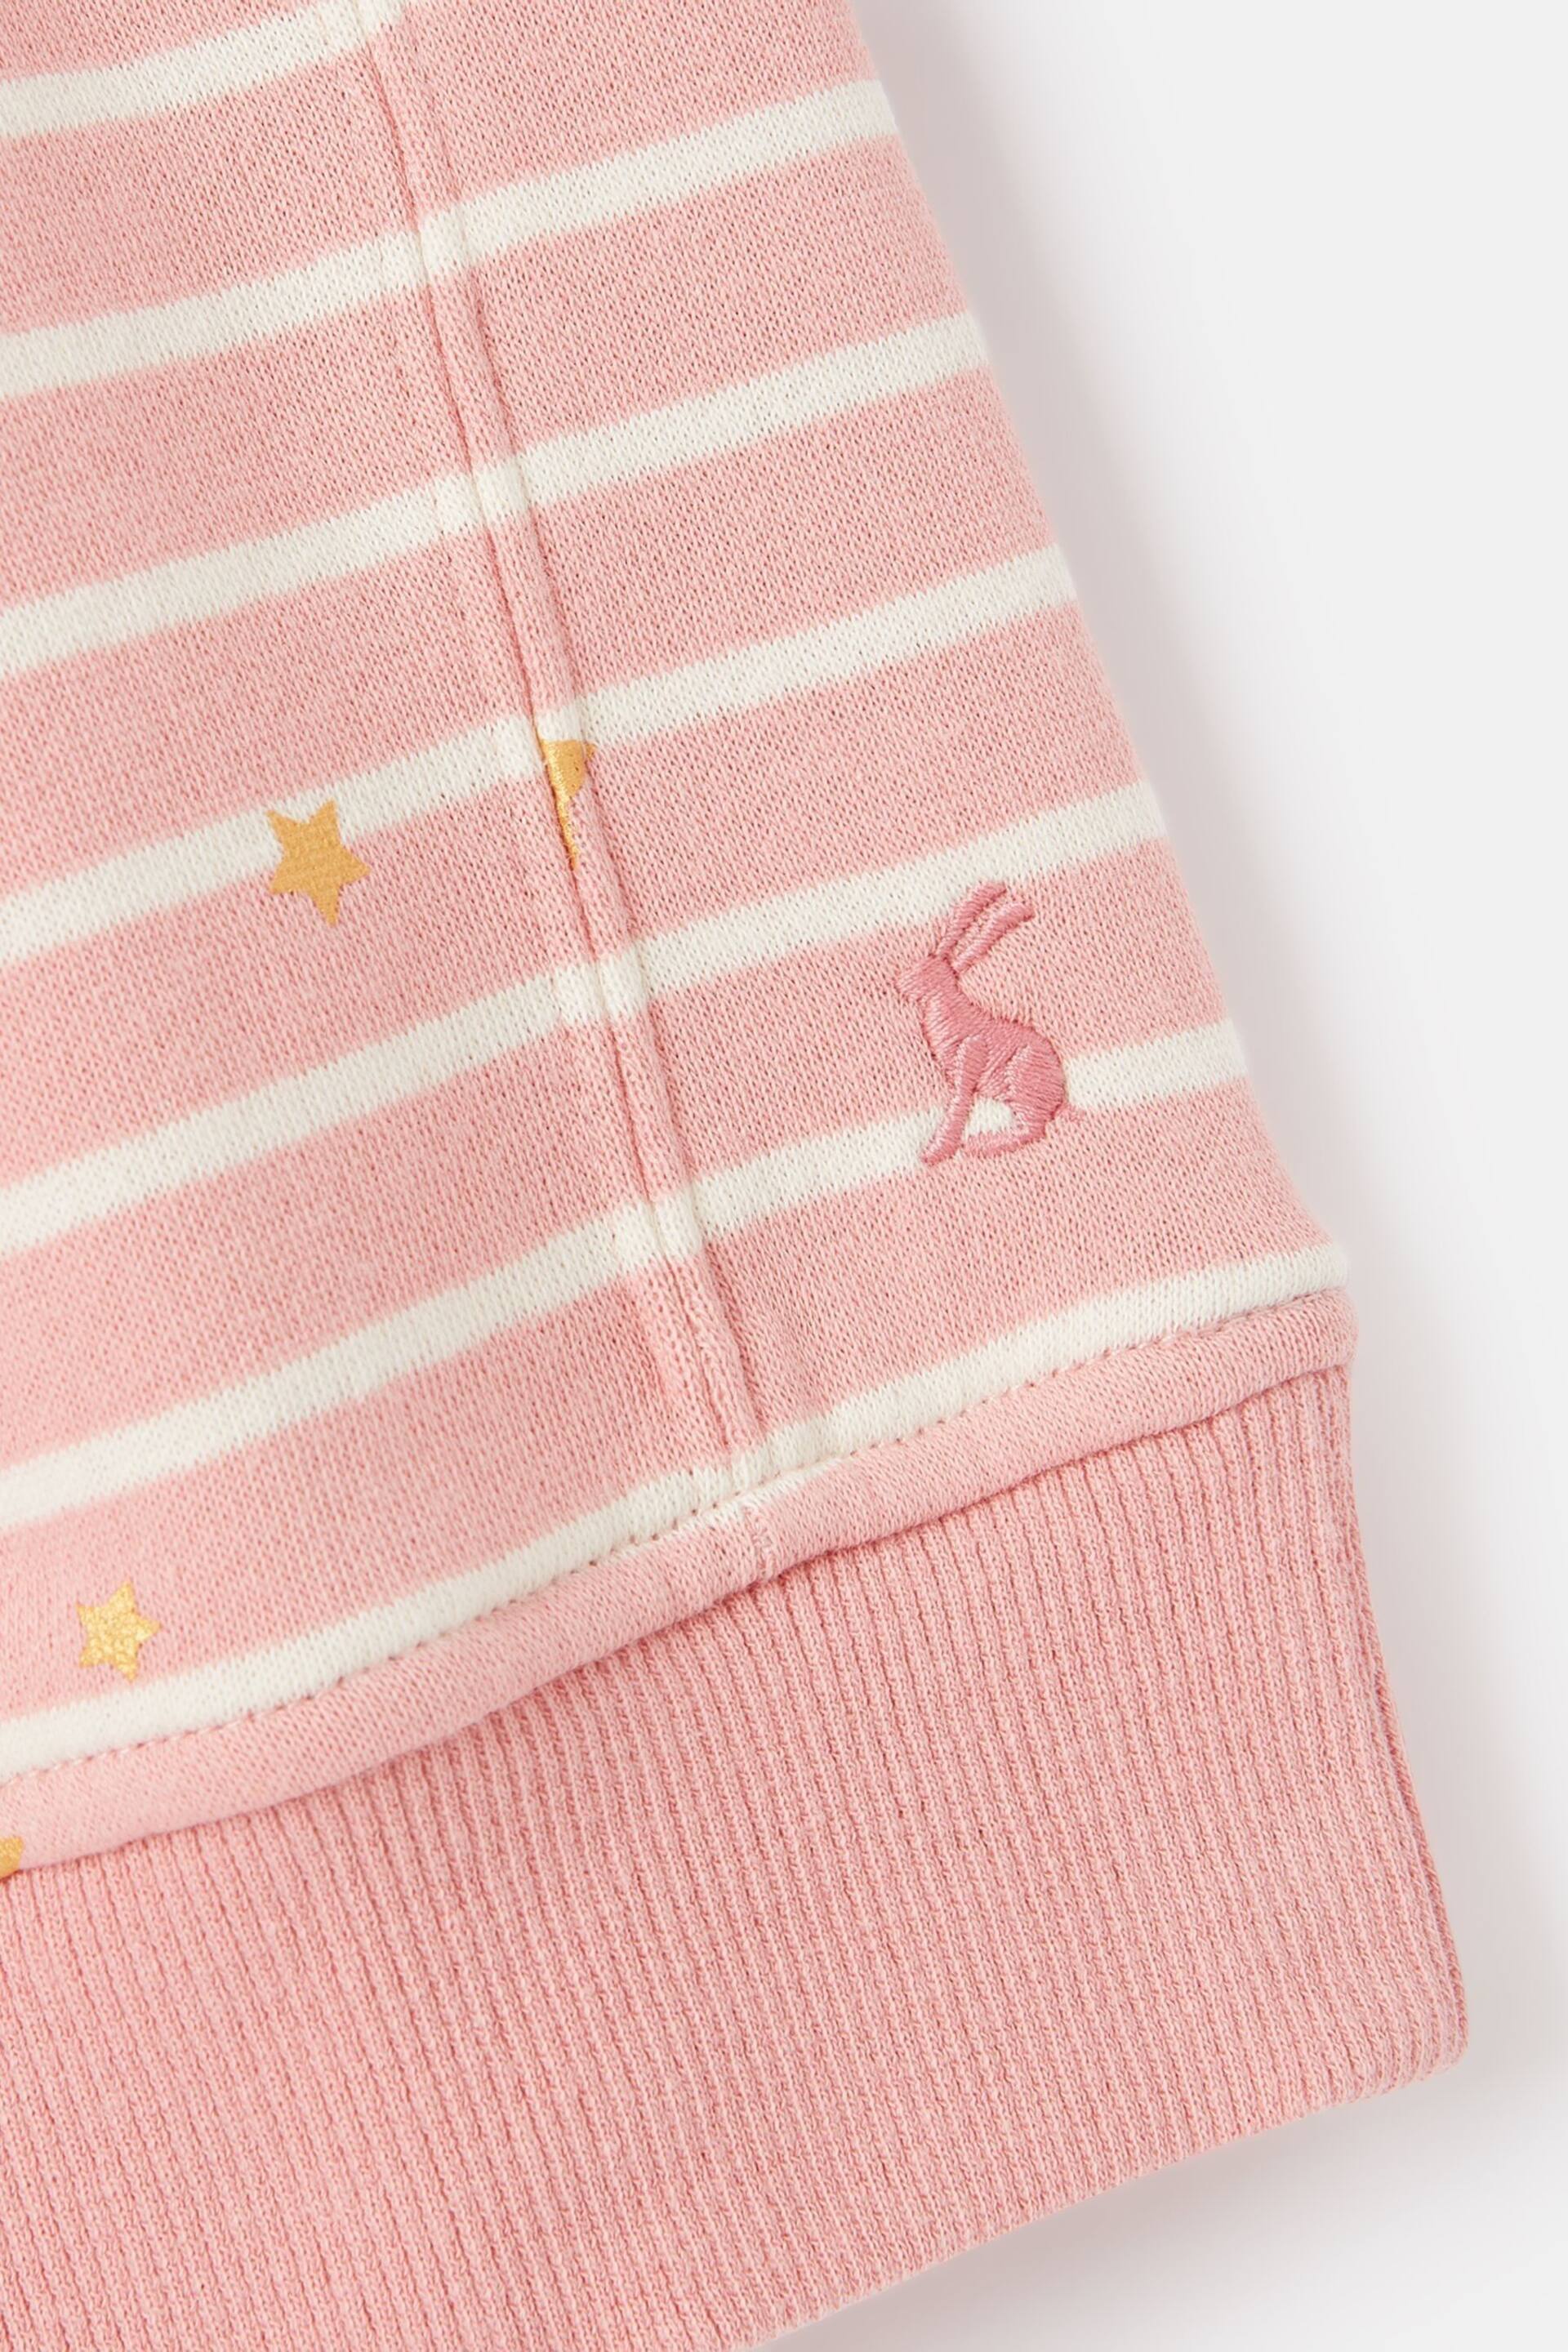 Joules Poppy Pink Striped Sweater Dress - Image 4 of 5